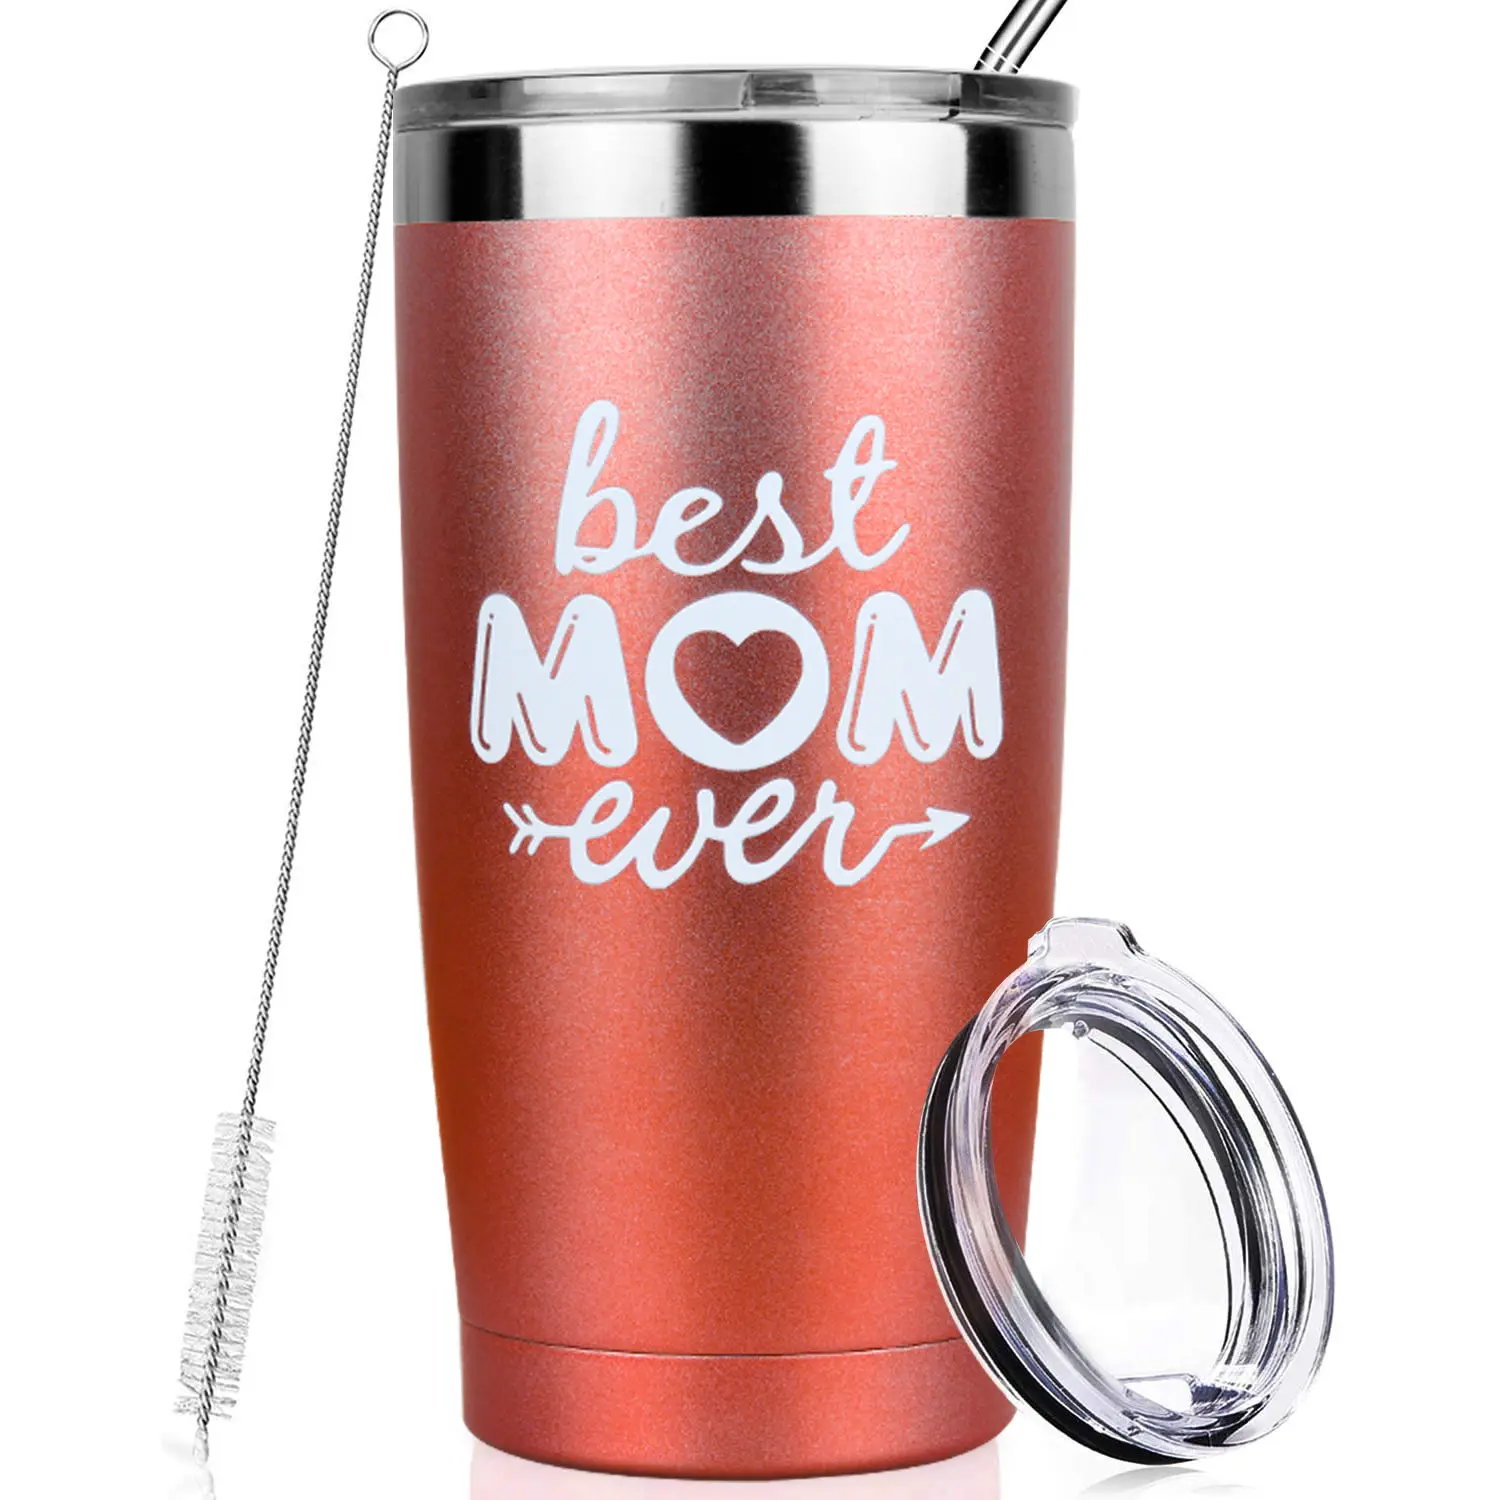 Best Mom Ever 304 stainless steel insulation double vacuum 20OZ car tumblers cups mothers day gift set ideas